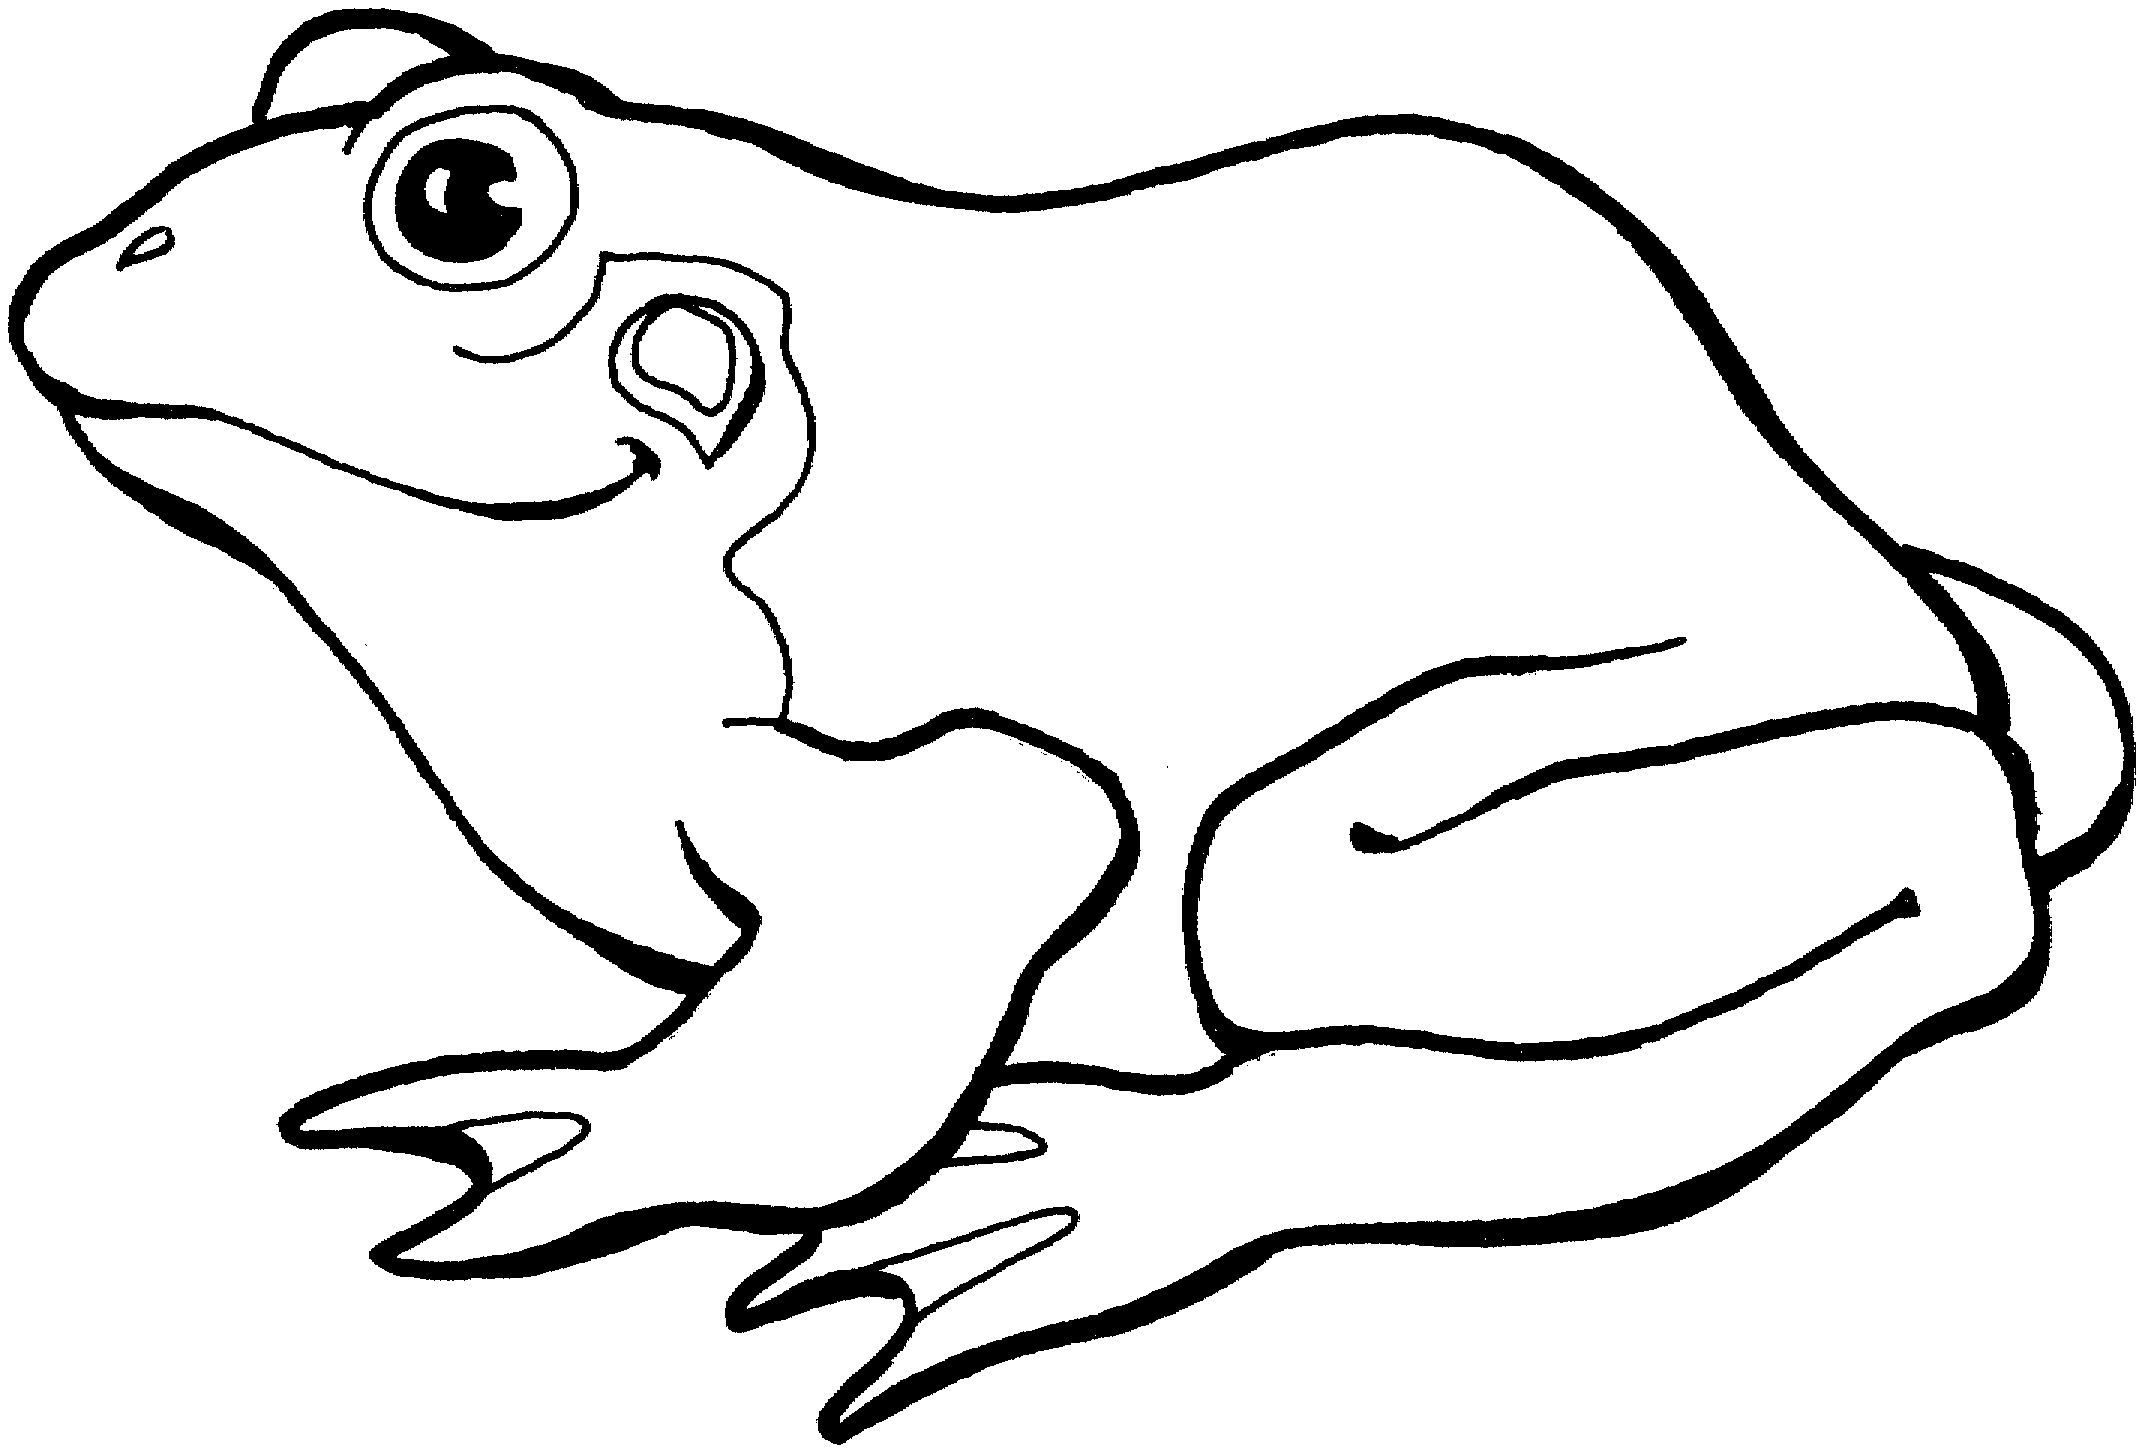 Frog black and white frog clipart black and white